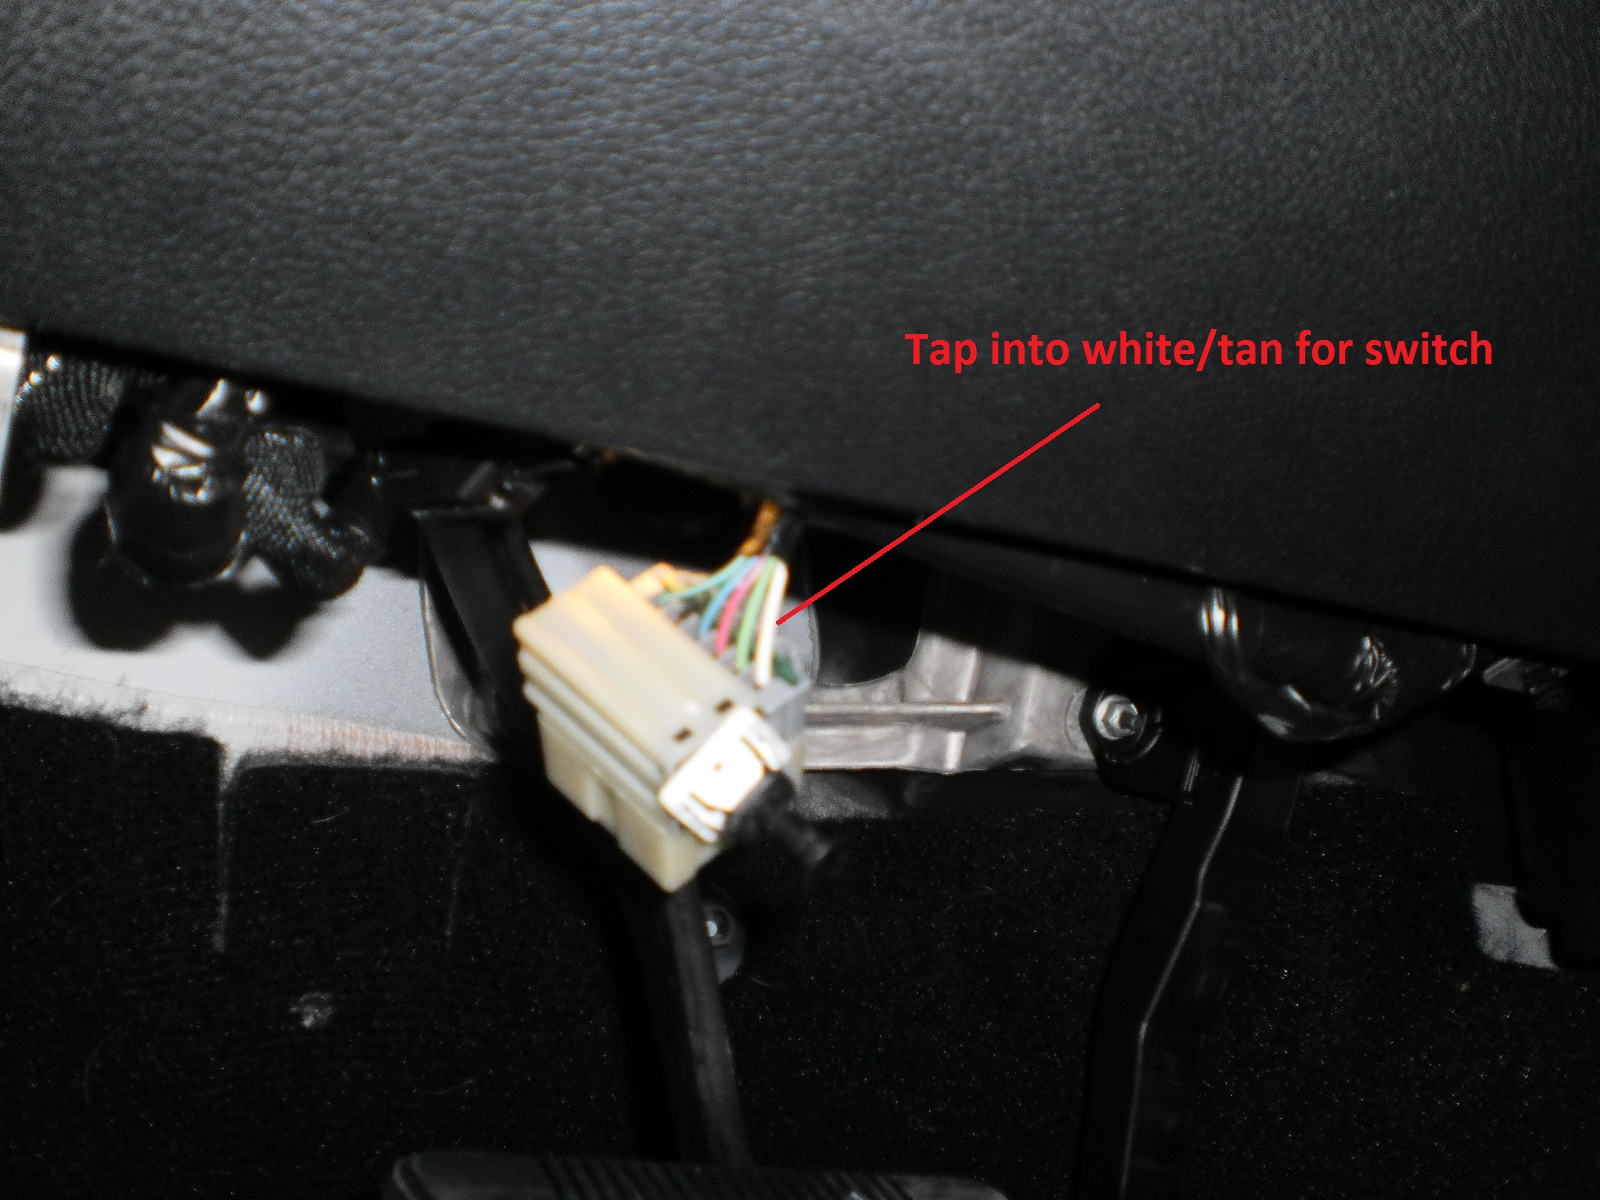 2013 Jeep Wrangler Hitch Wiring Wiring Diagram Wave Central A Wave Central A Remieracasteo It